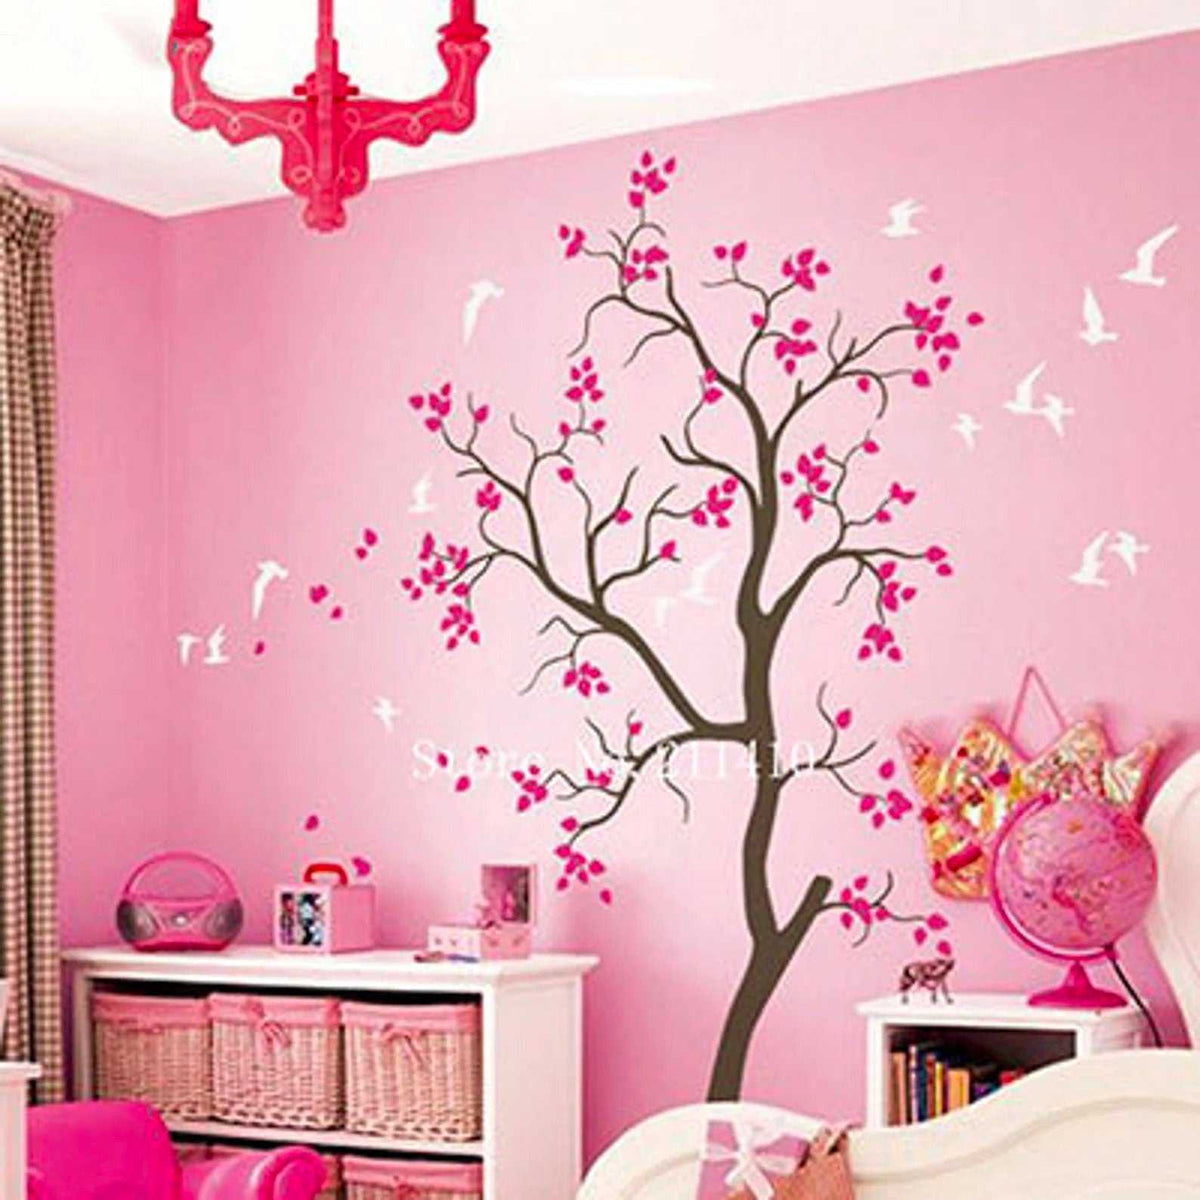 Large Tree Wall Sticker with Flying Birds | Living Room wall decal